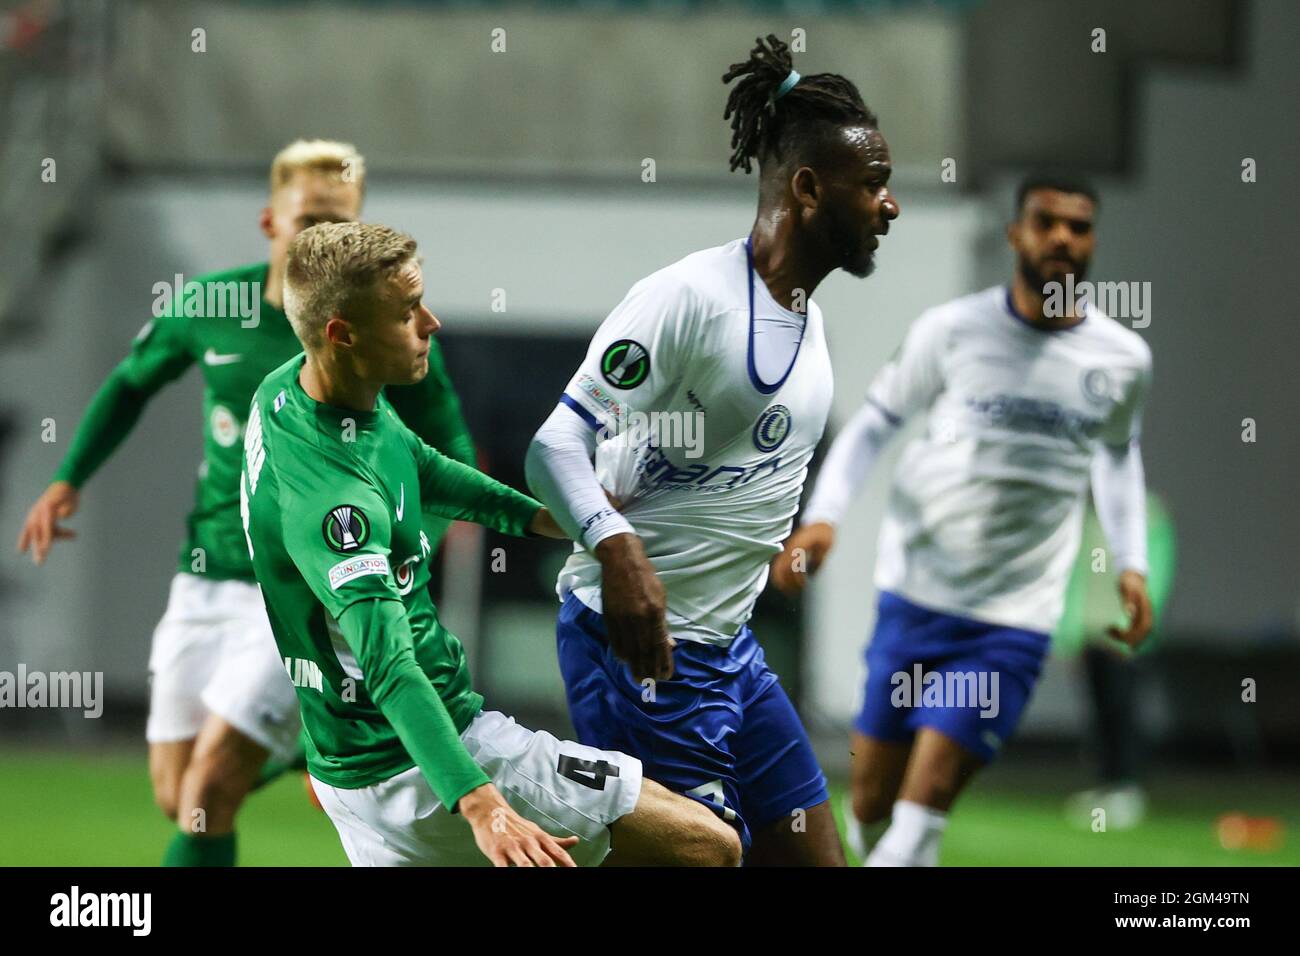 Flora's Marco Lukka and Gent's Ilombe Mboyo fight for the ball during a soccer game between Estonian FC Flora Tallinn and Belgian KAA Gent, Thursday 1 Stock Photo